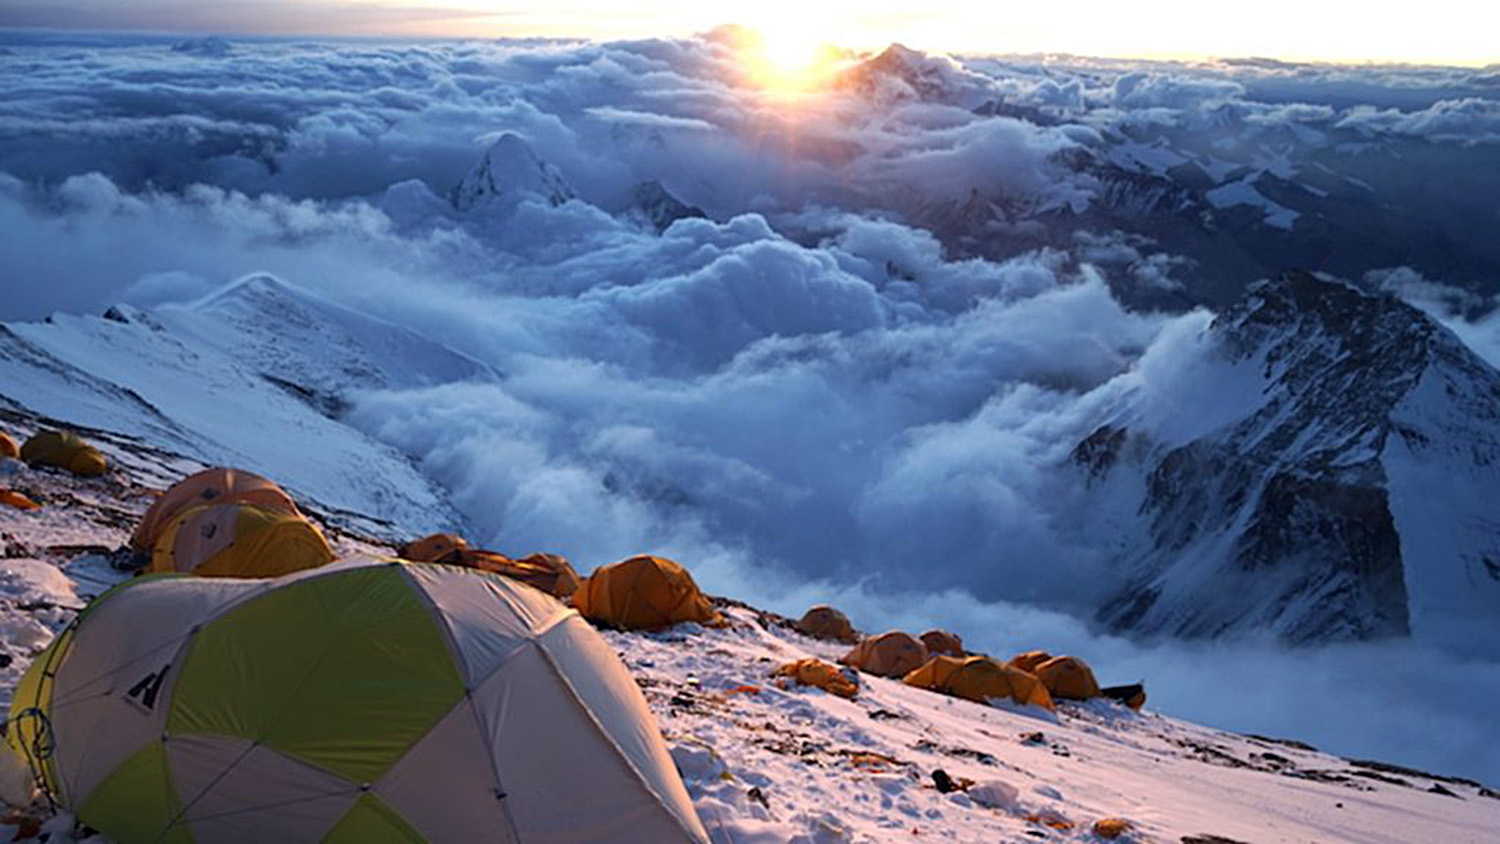 View of sunrise from near the summit of Mount Everest.